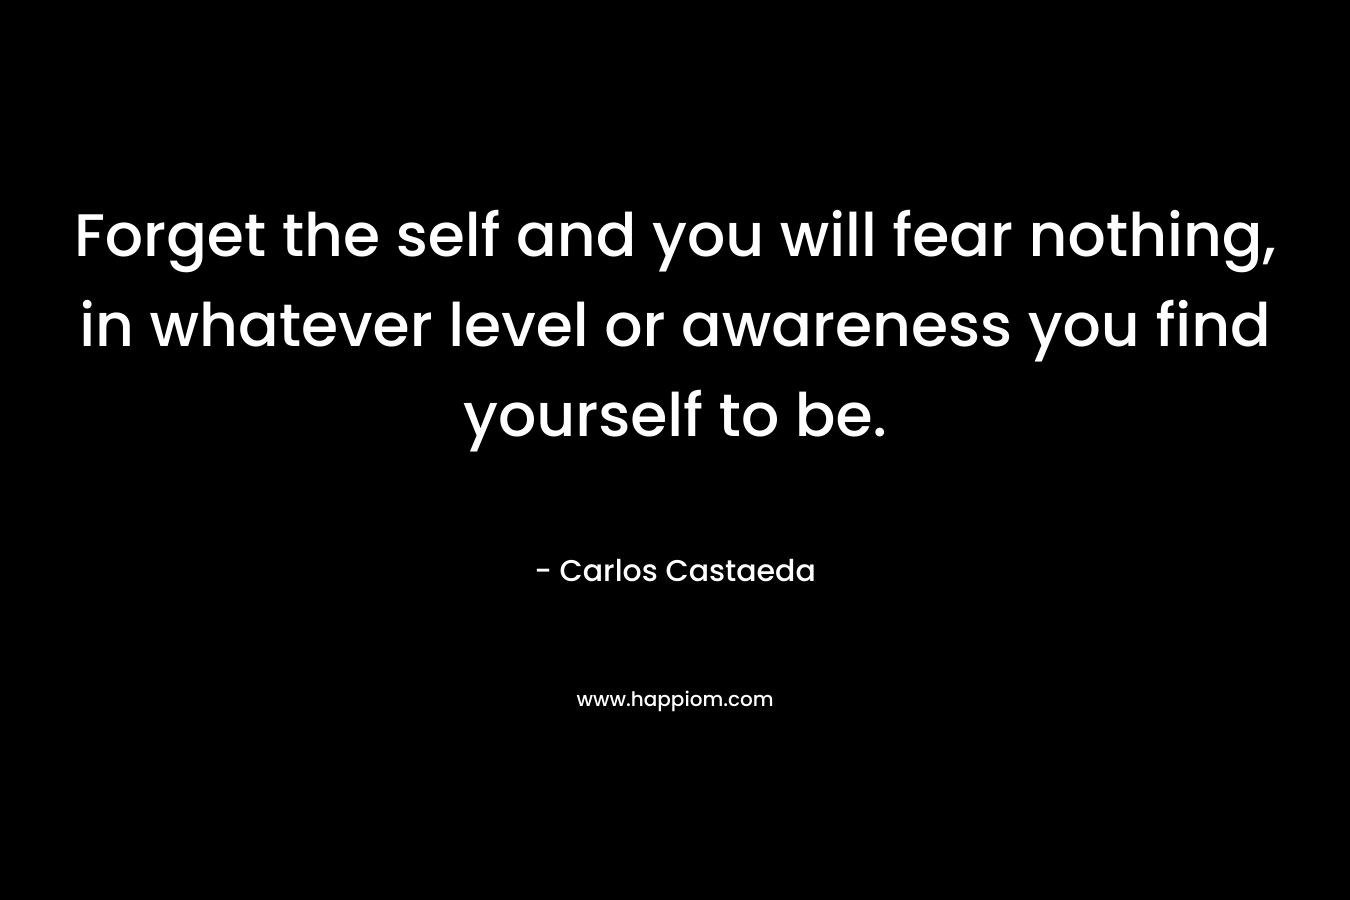 Forget the self and you will fear nothing, in whatever level or awareness you find yourself to be. – Carlos Castaeda